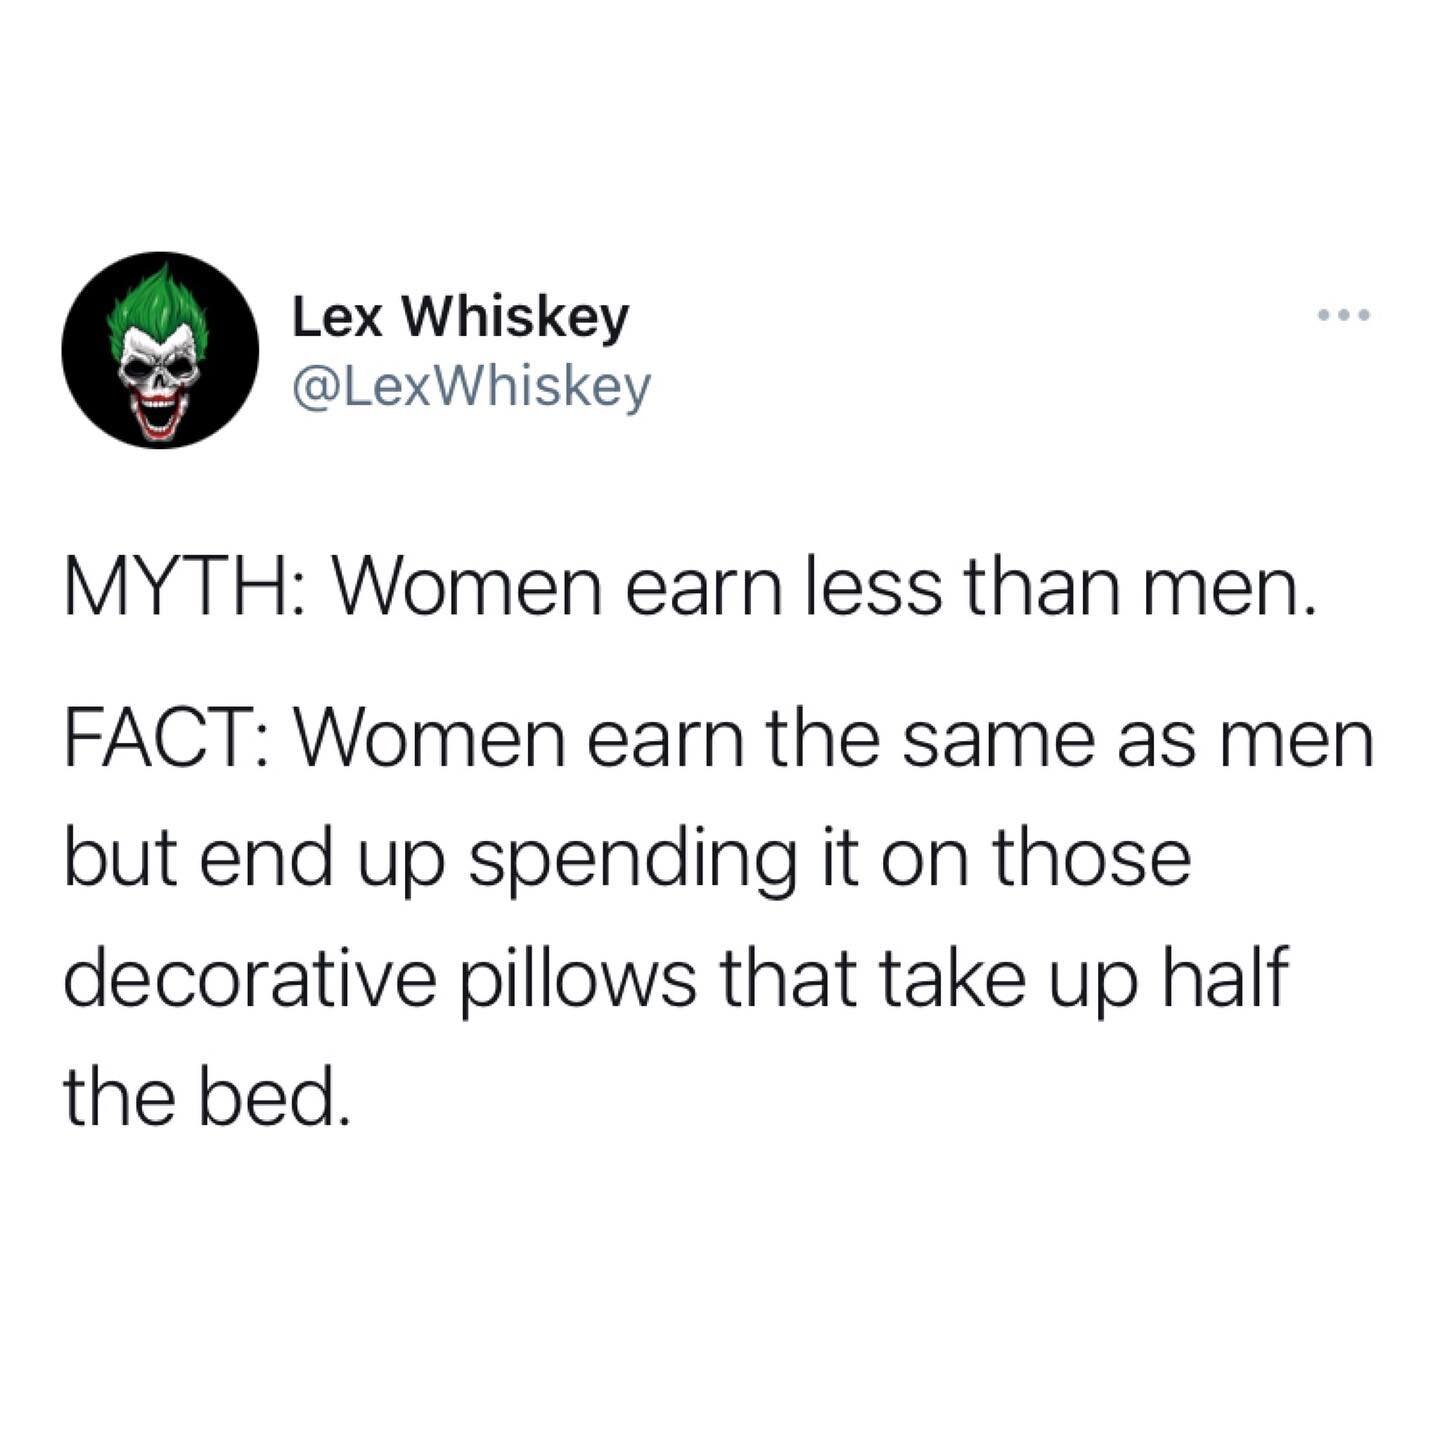 Another myth busted..